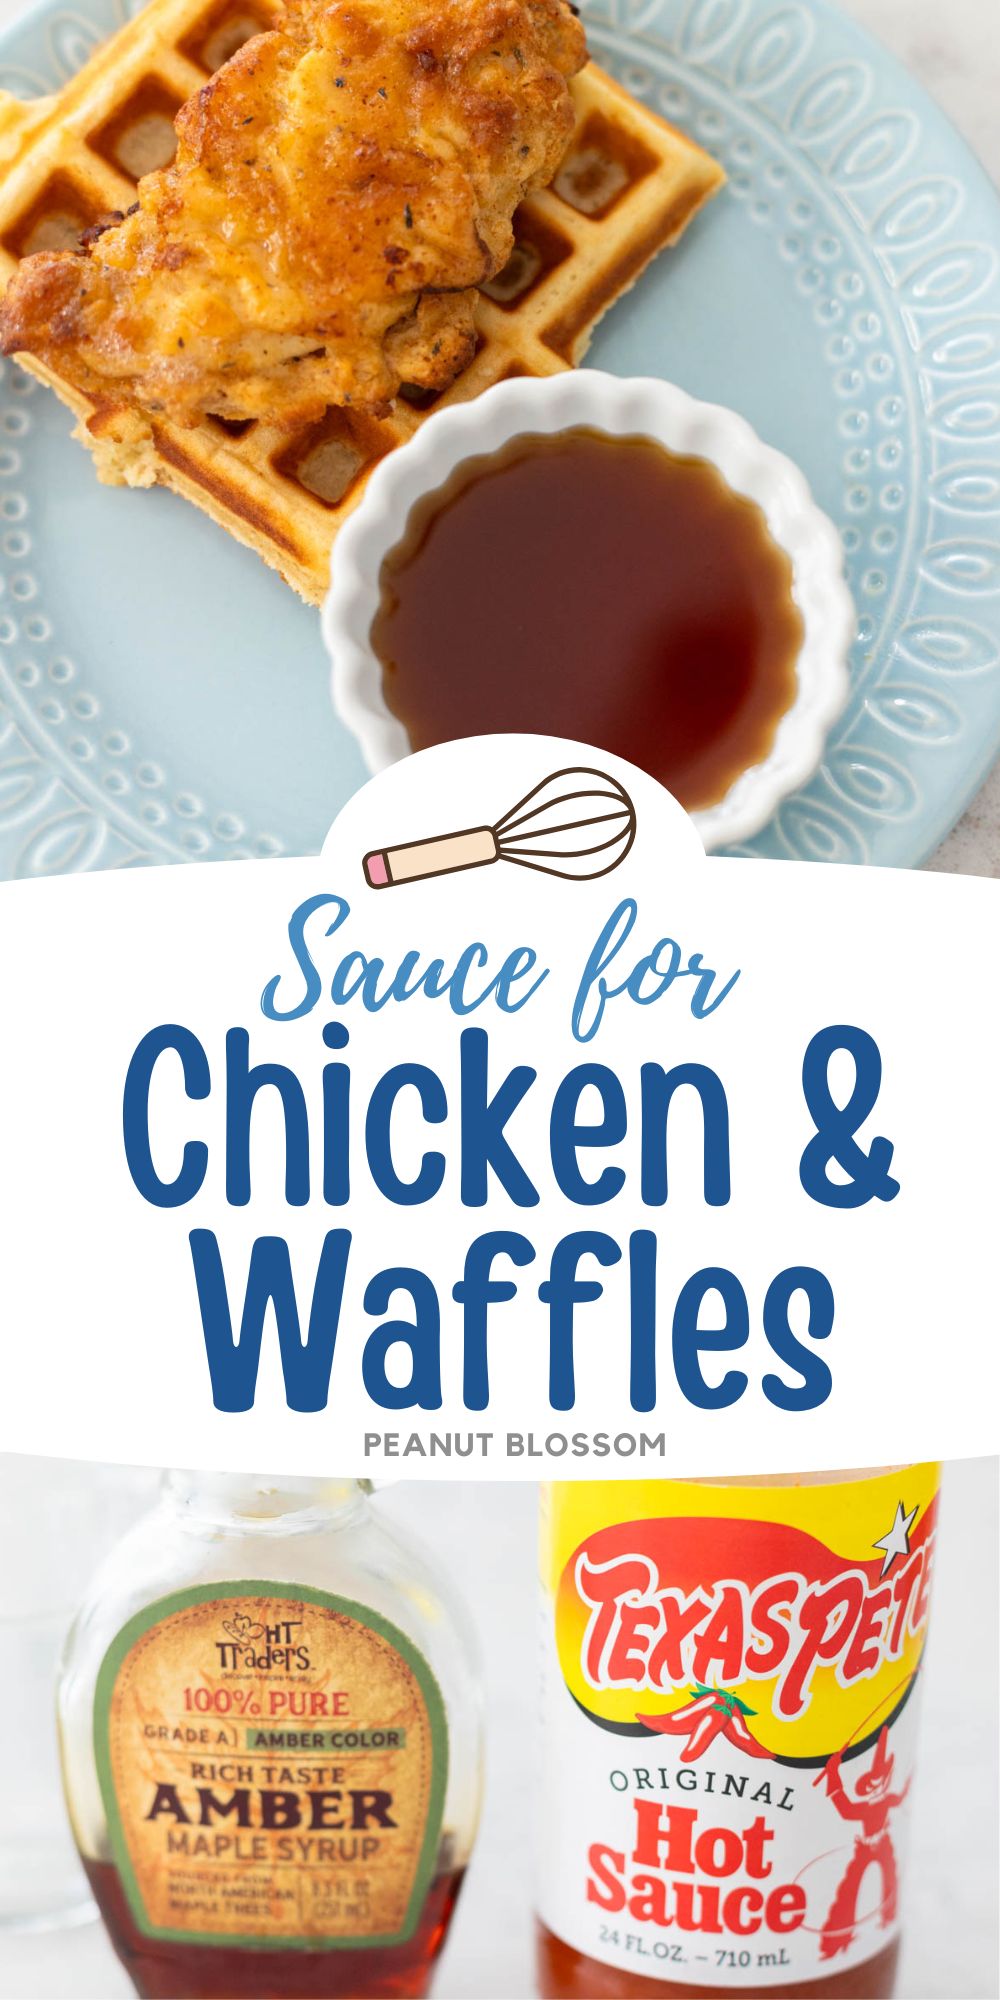 The photo collage shows the spicy maple syrup in a cup next to a plate of chicken and waffles.